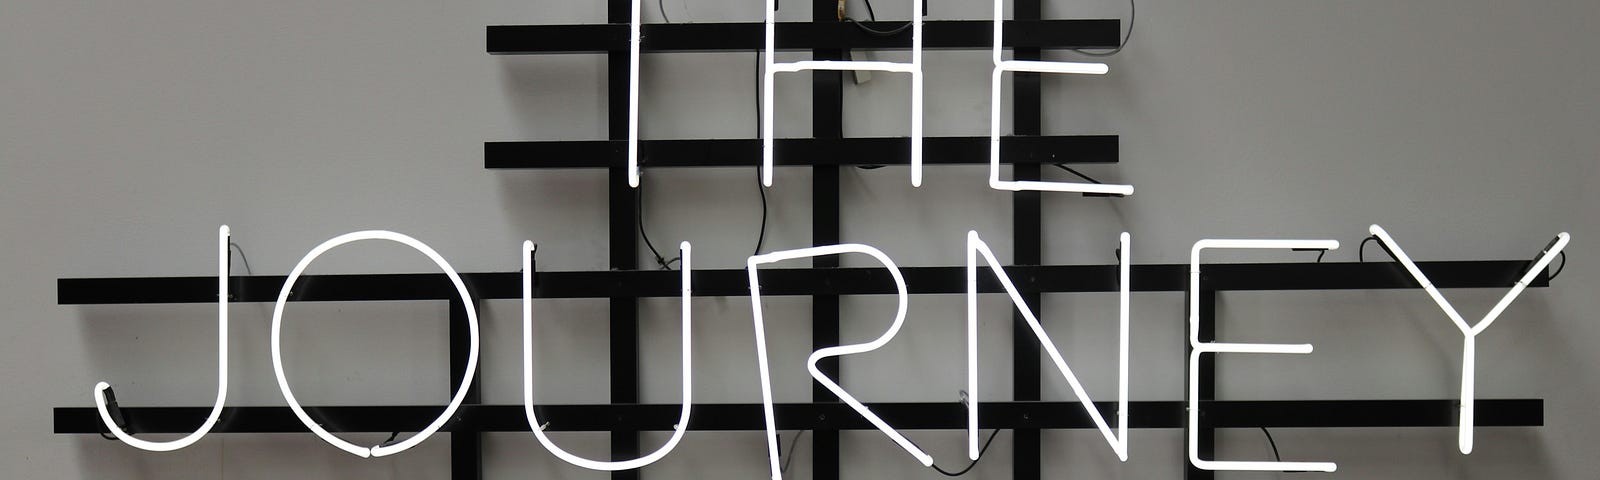 A black and white photograph of a neon sign that says “The Journey is On” in capital letters.